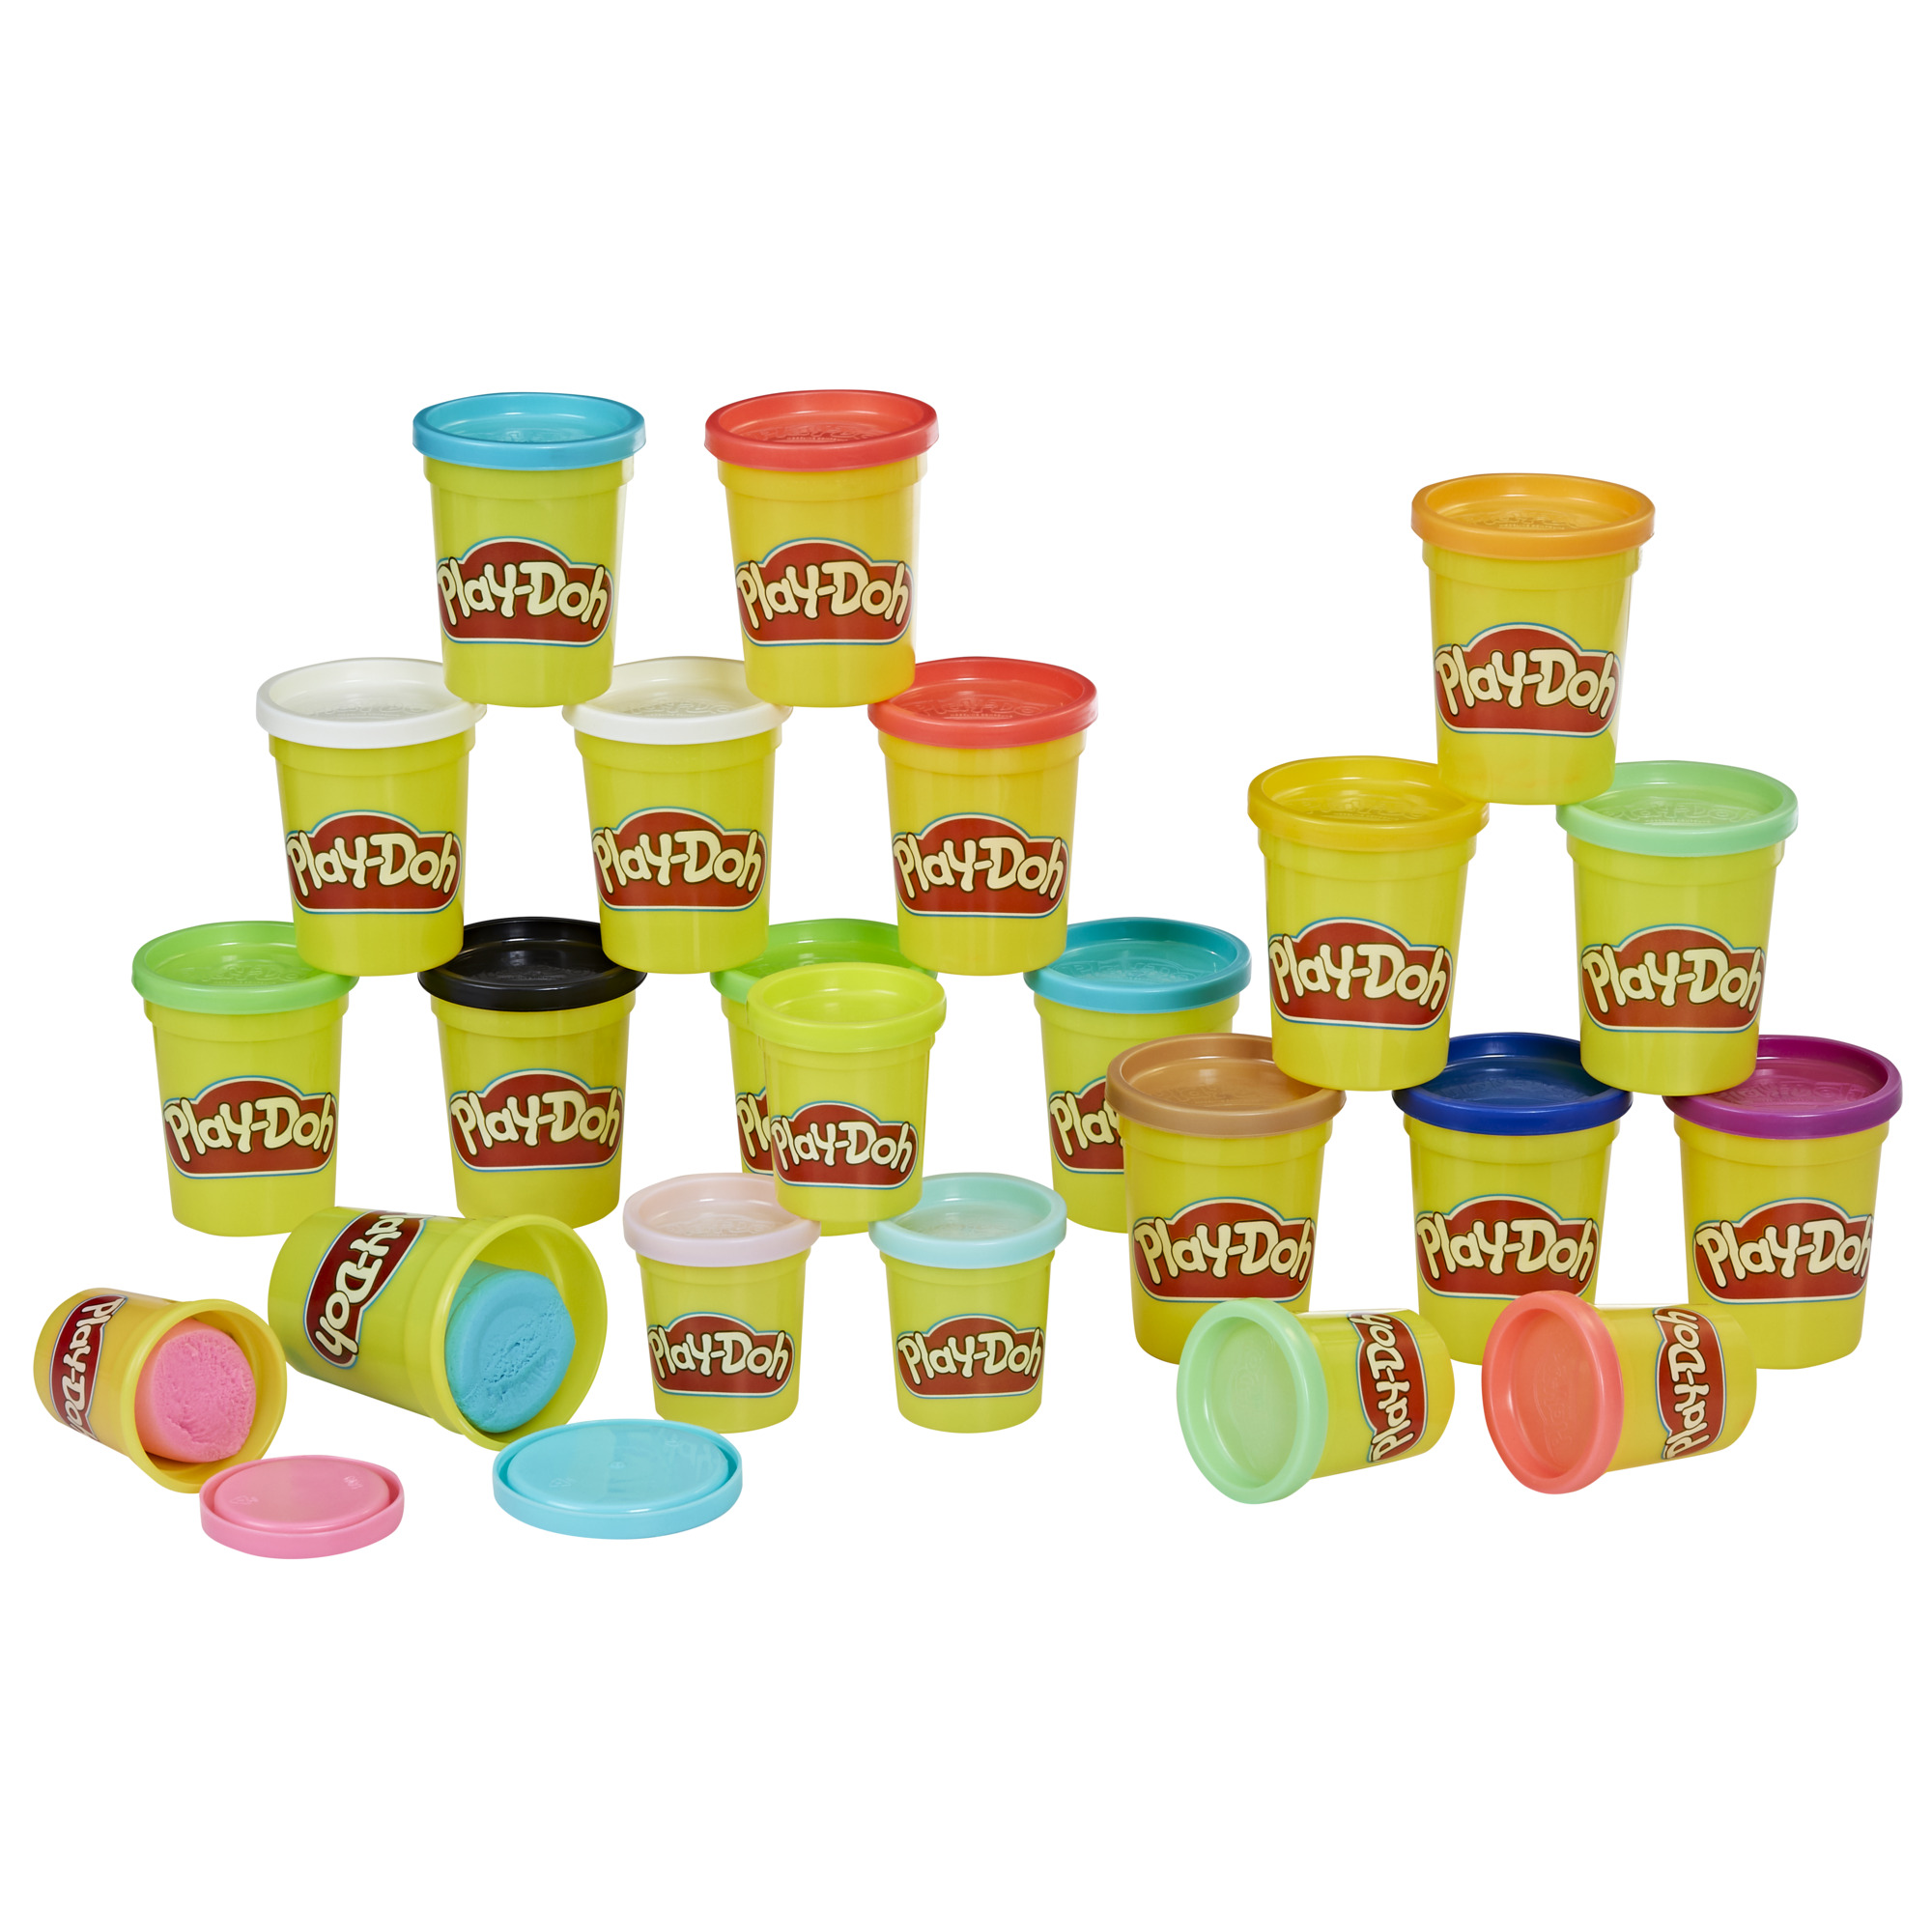 Play-Doh Big Pack of Colors Play Dough Set - 28 Color (28 Piece), Only At Walmart - image 2 of 4